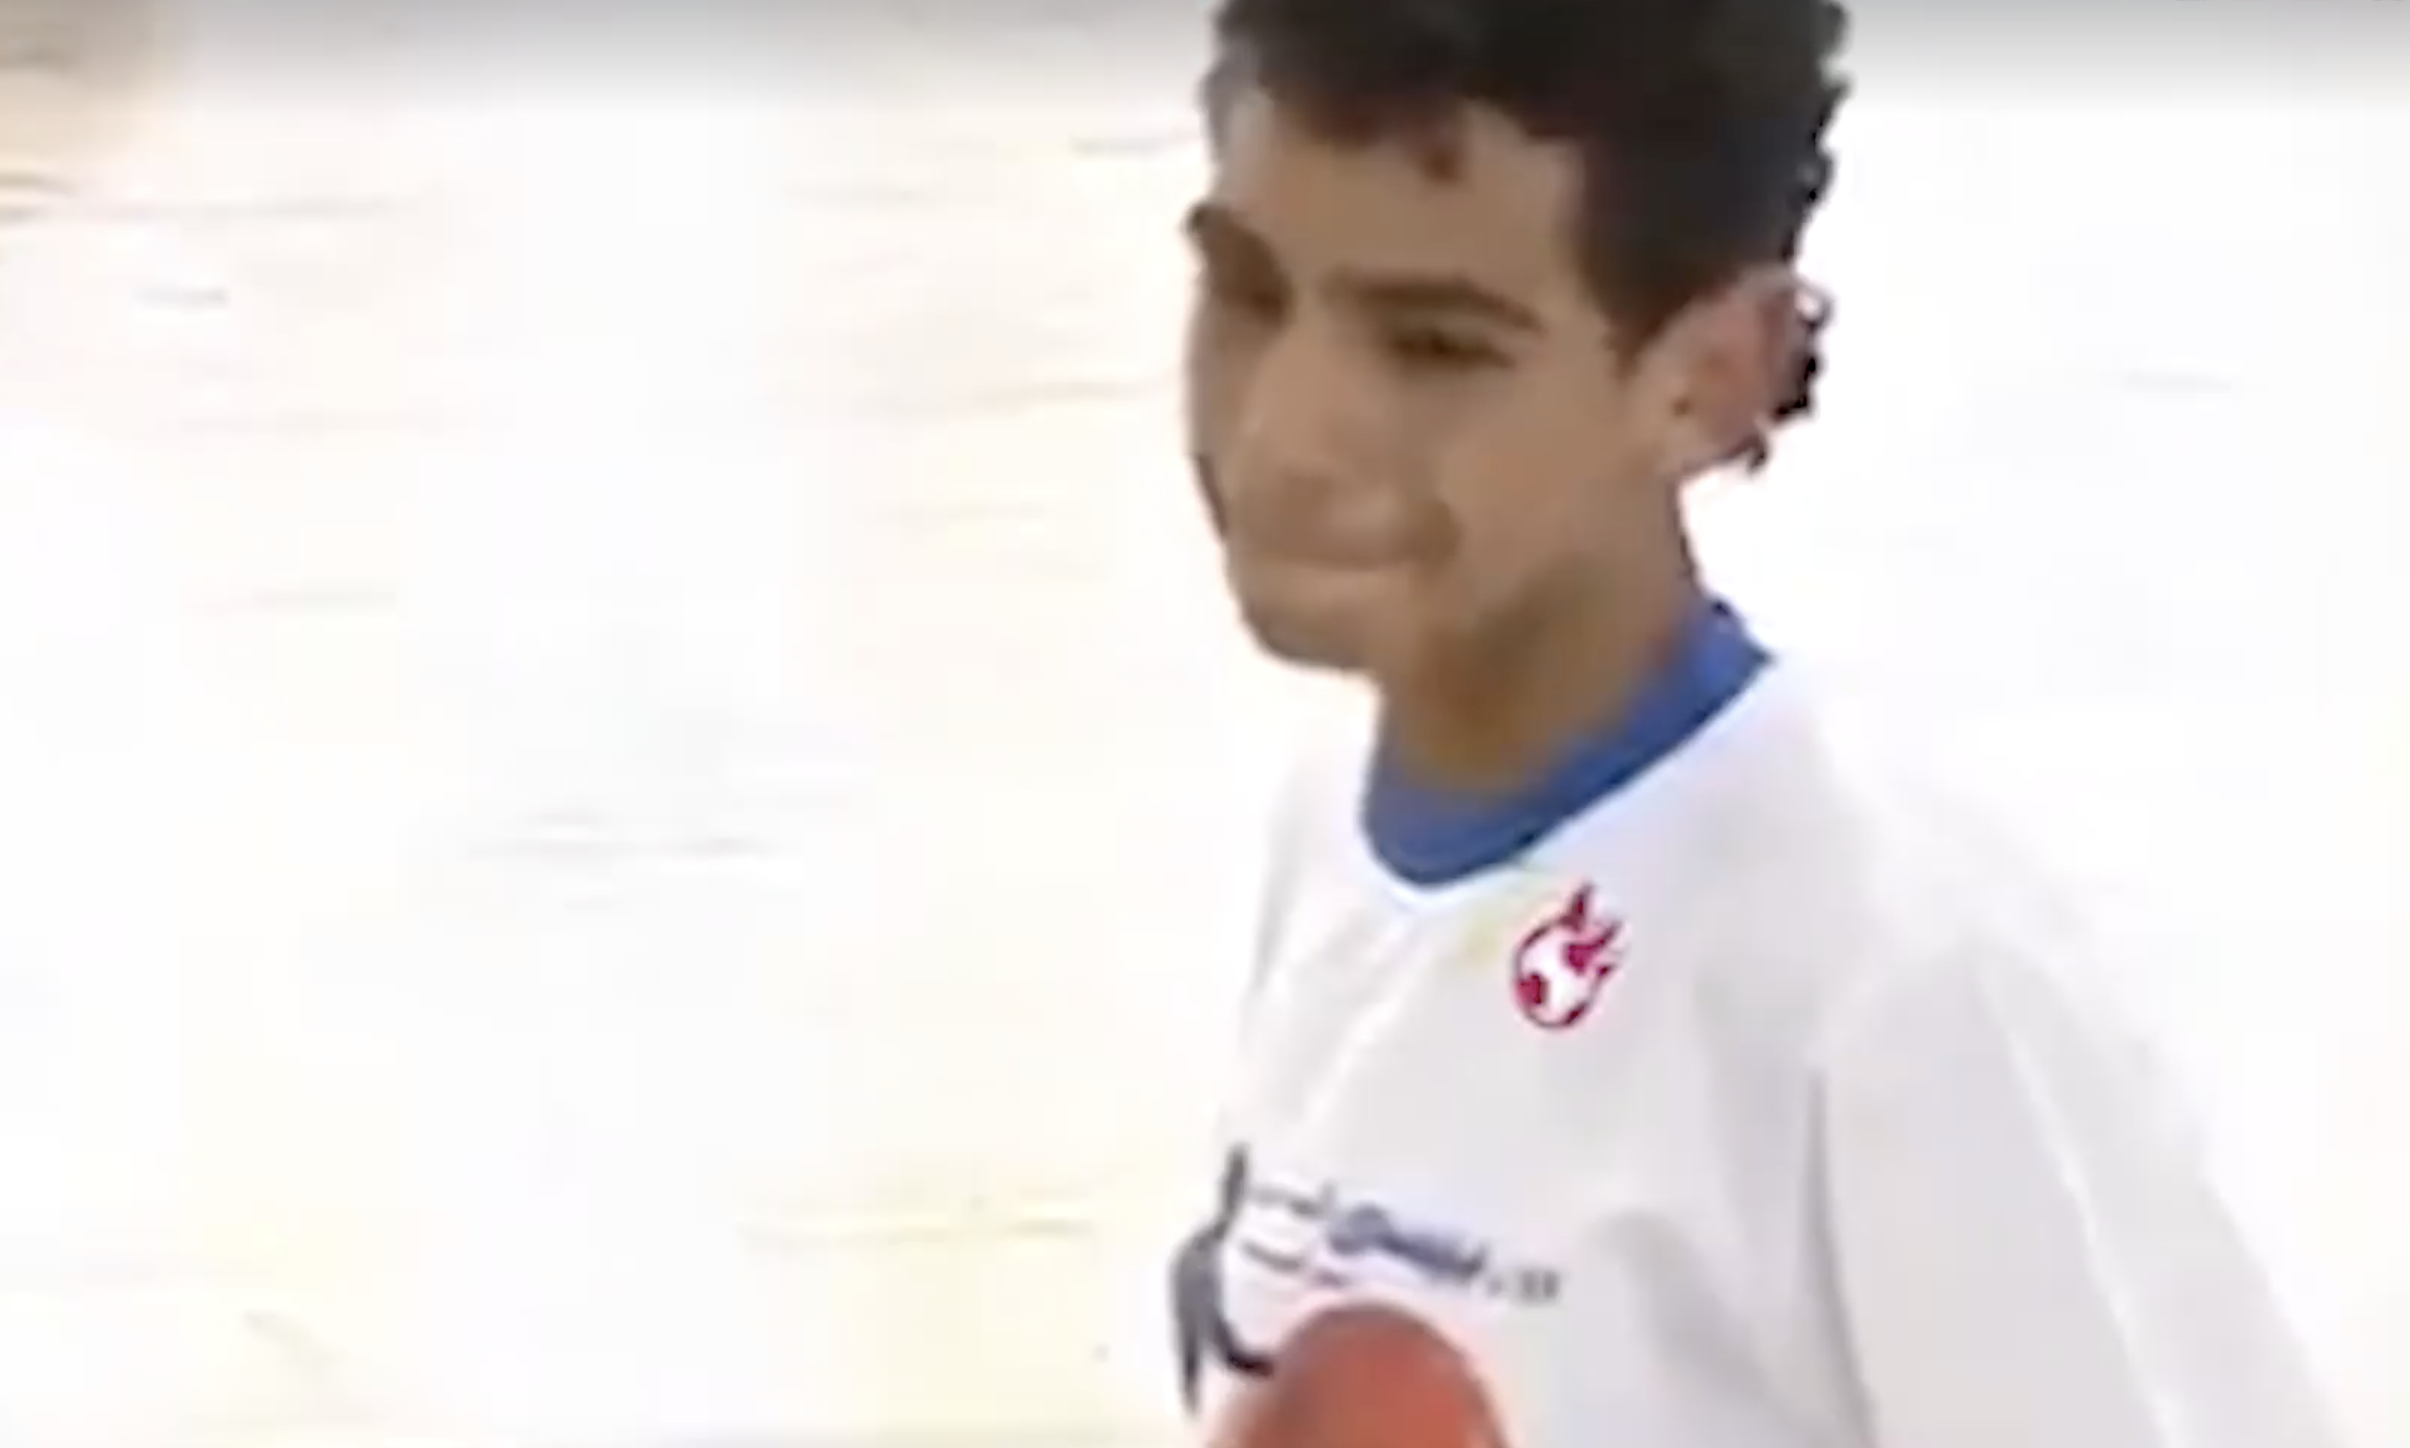 Mohamed Salah Was Scoring Goals Since He Was Young